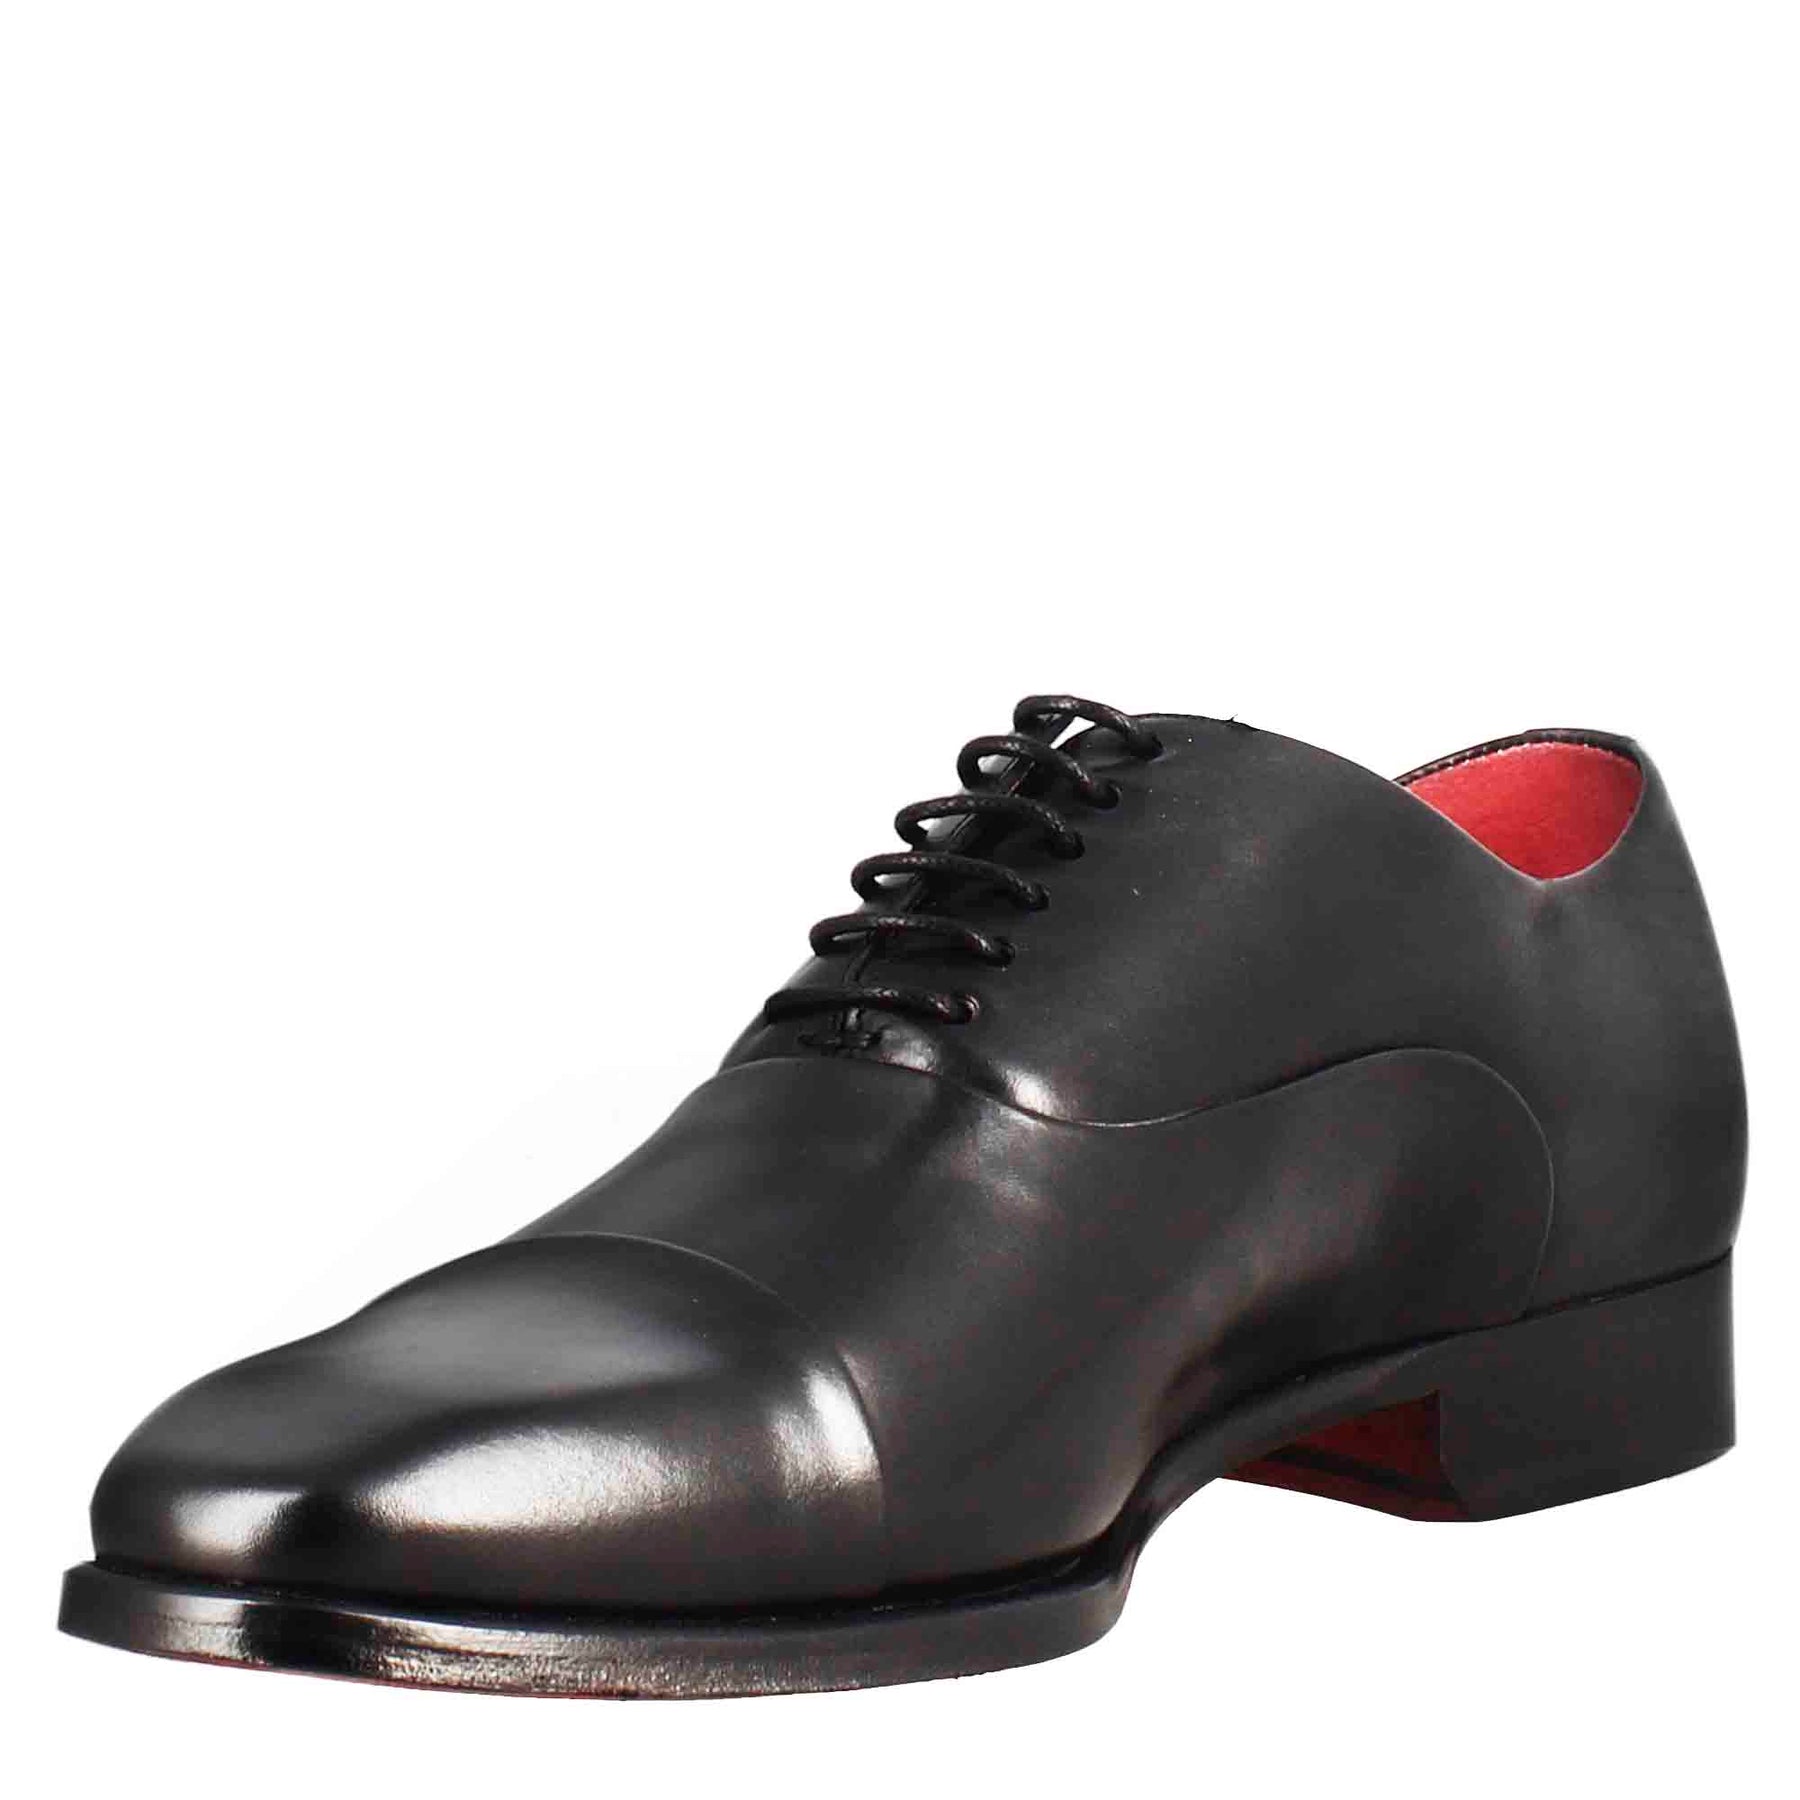 French toe shoes in black leather